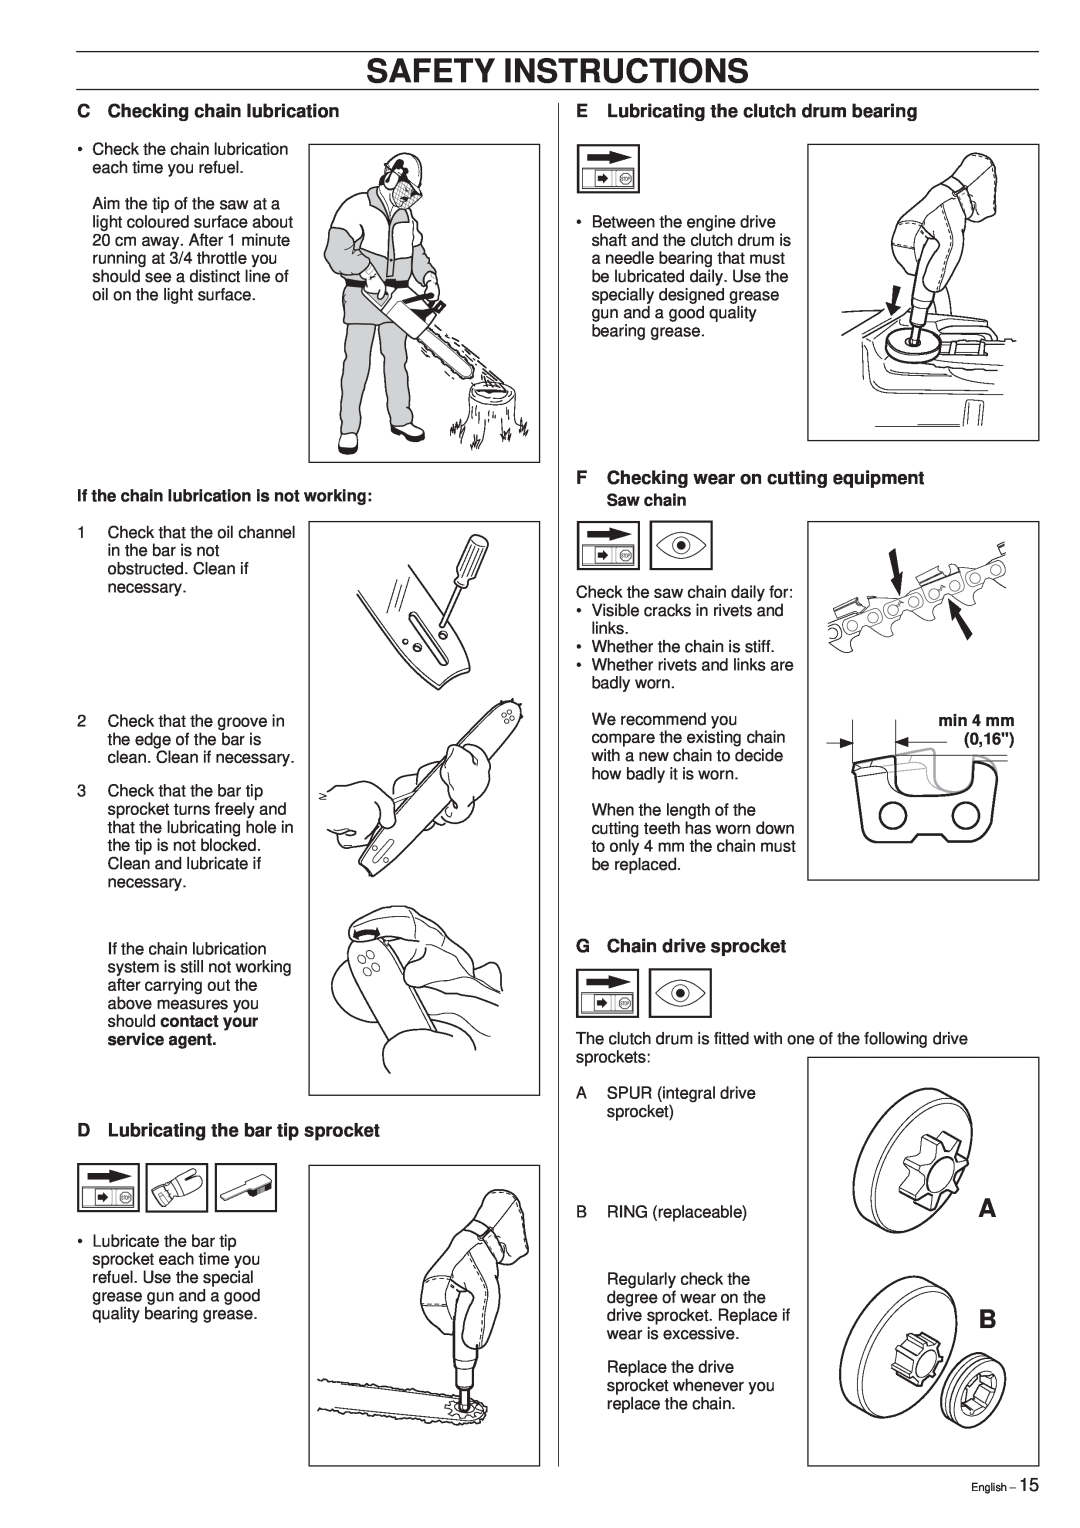 Husqvarna 254XP, 257, 262XP manual Safety Instructions, C Checking chain lubrication, E Lubricating the clutch drum bearing 